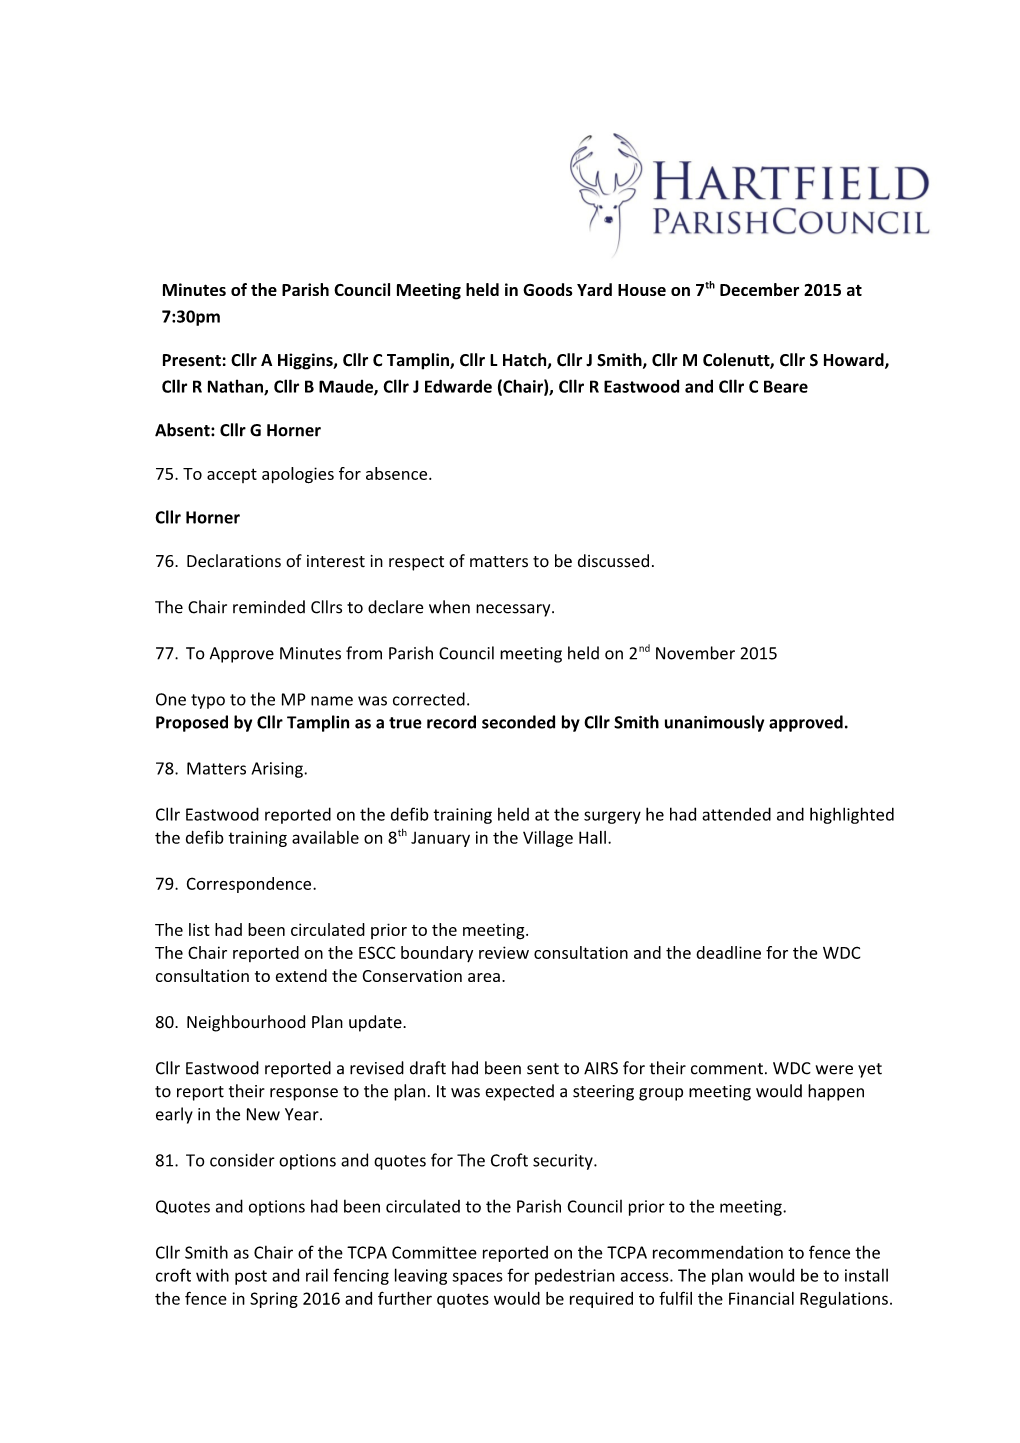 Minutes of the Parish Council Meeting Held in Goods Yard House on 7Th December 2015 at 7:30Pm